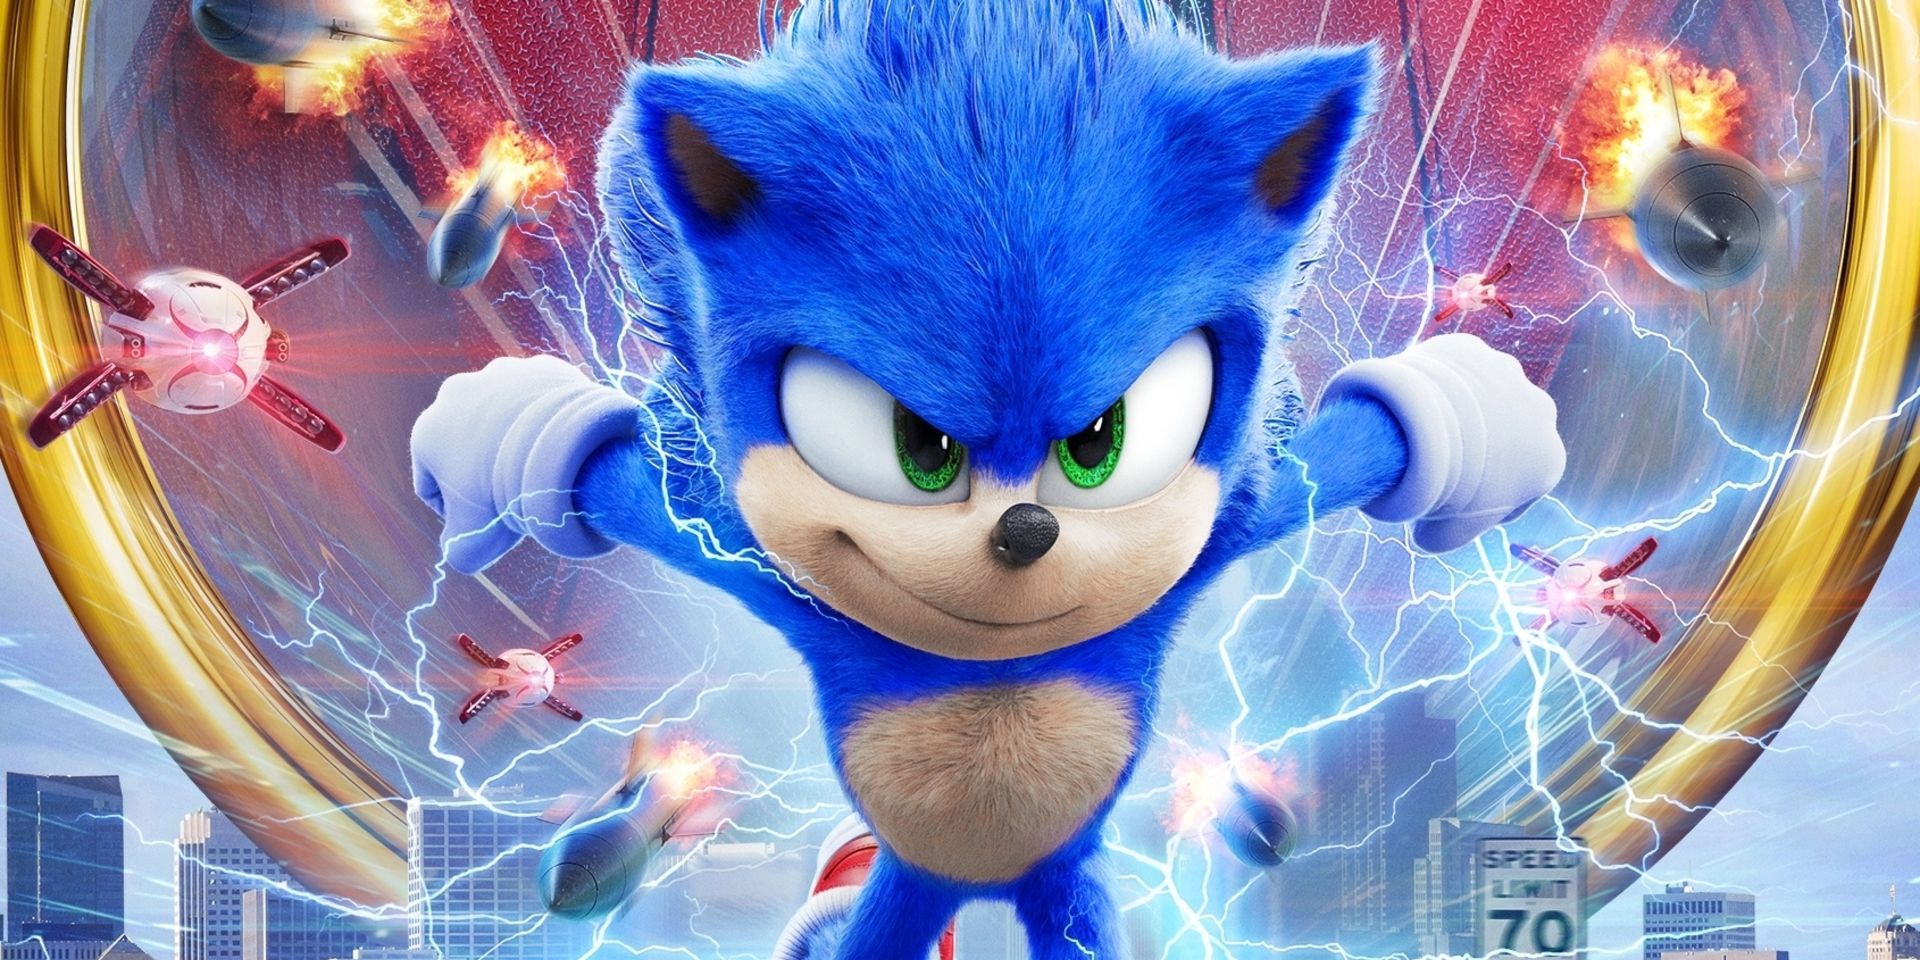 New Sonic movie trailer officially debuts new character design 9to5Toys